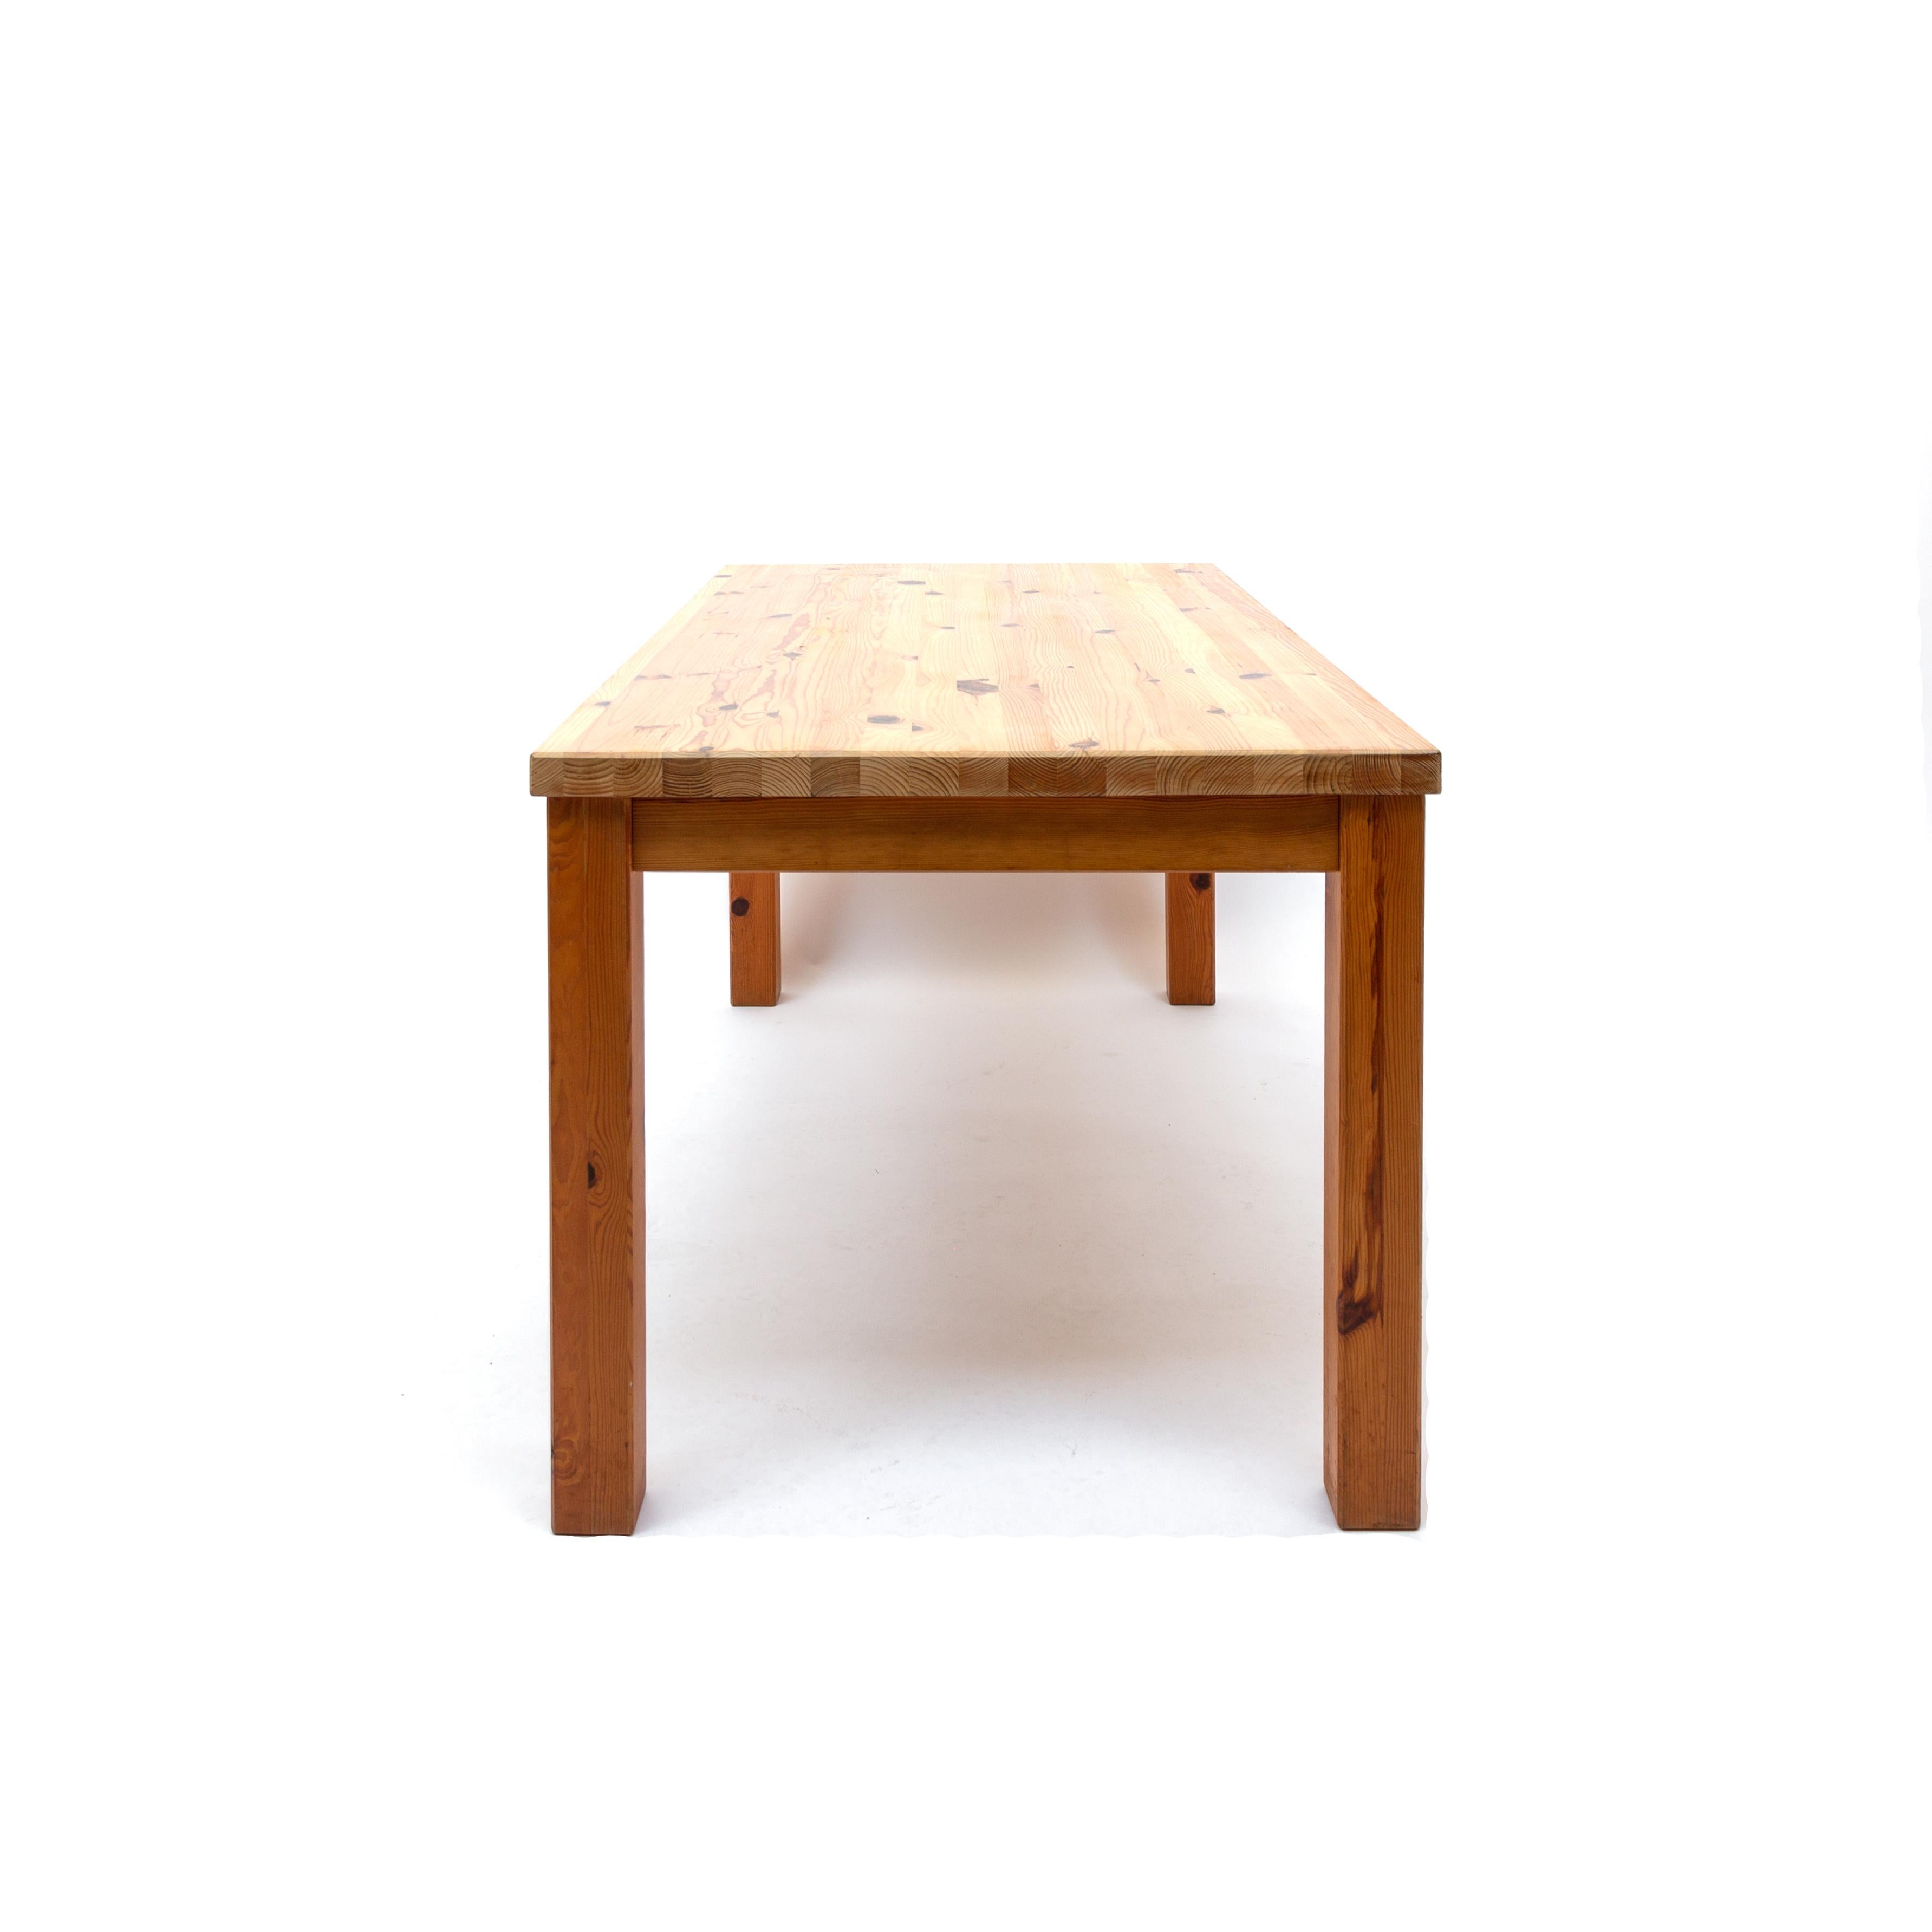 Late 20th Century Original Brutalist Pinewood Dining Table, 1970s